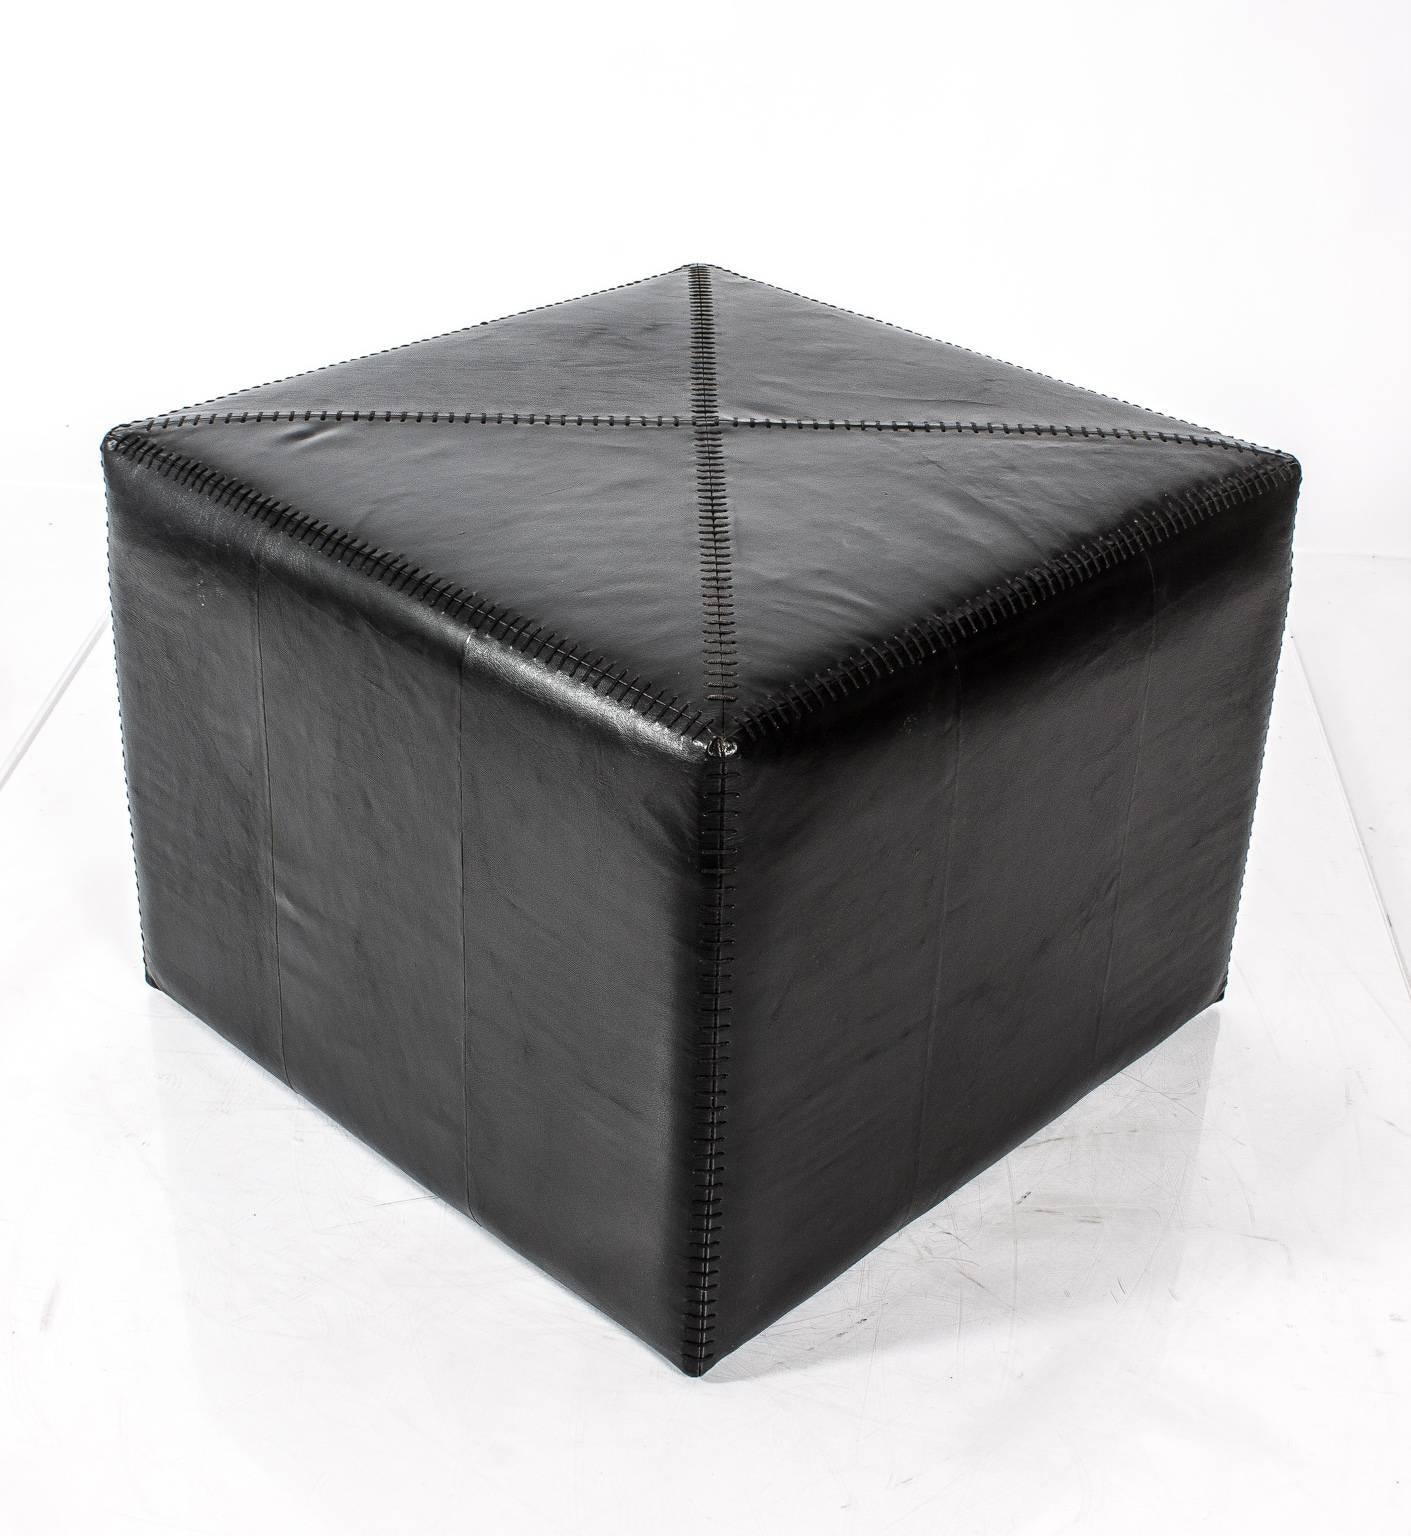 Square black leather stool/ottoman with top stitching.